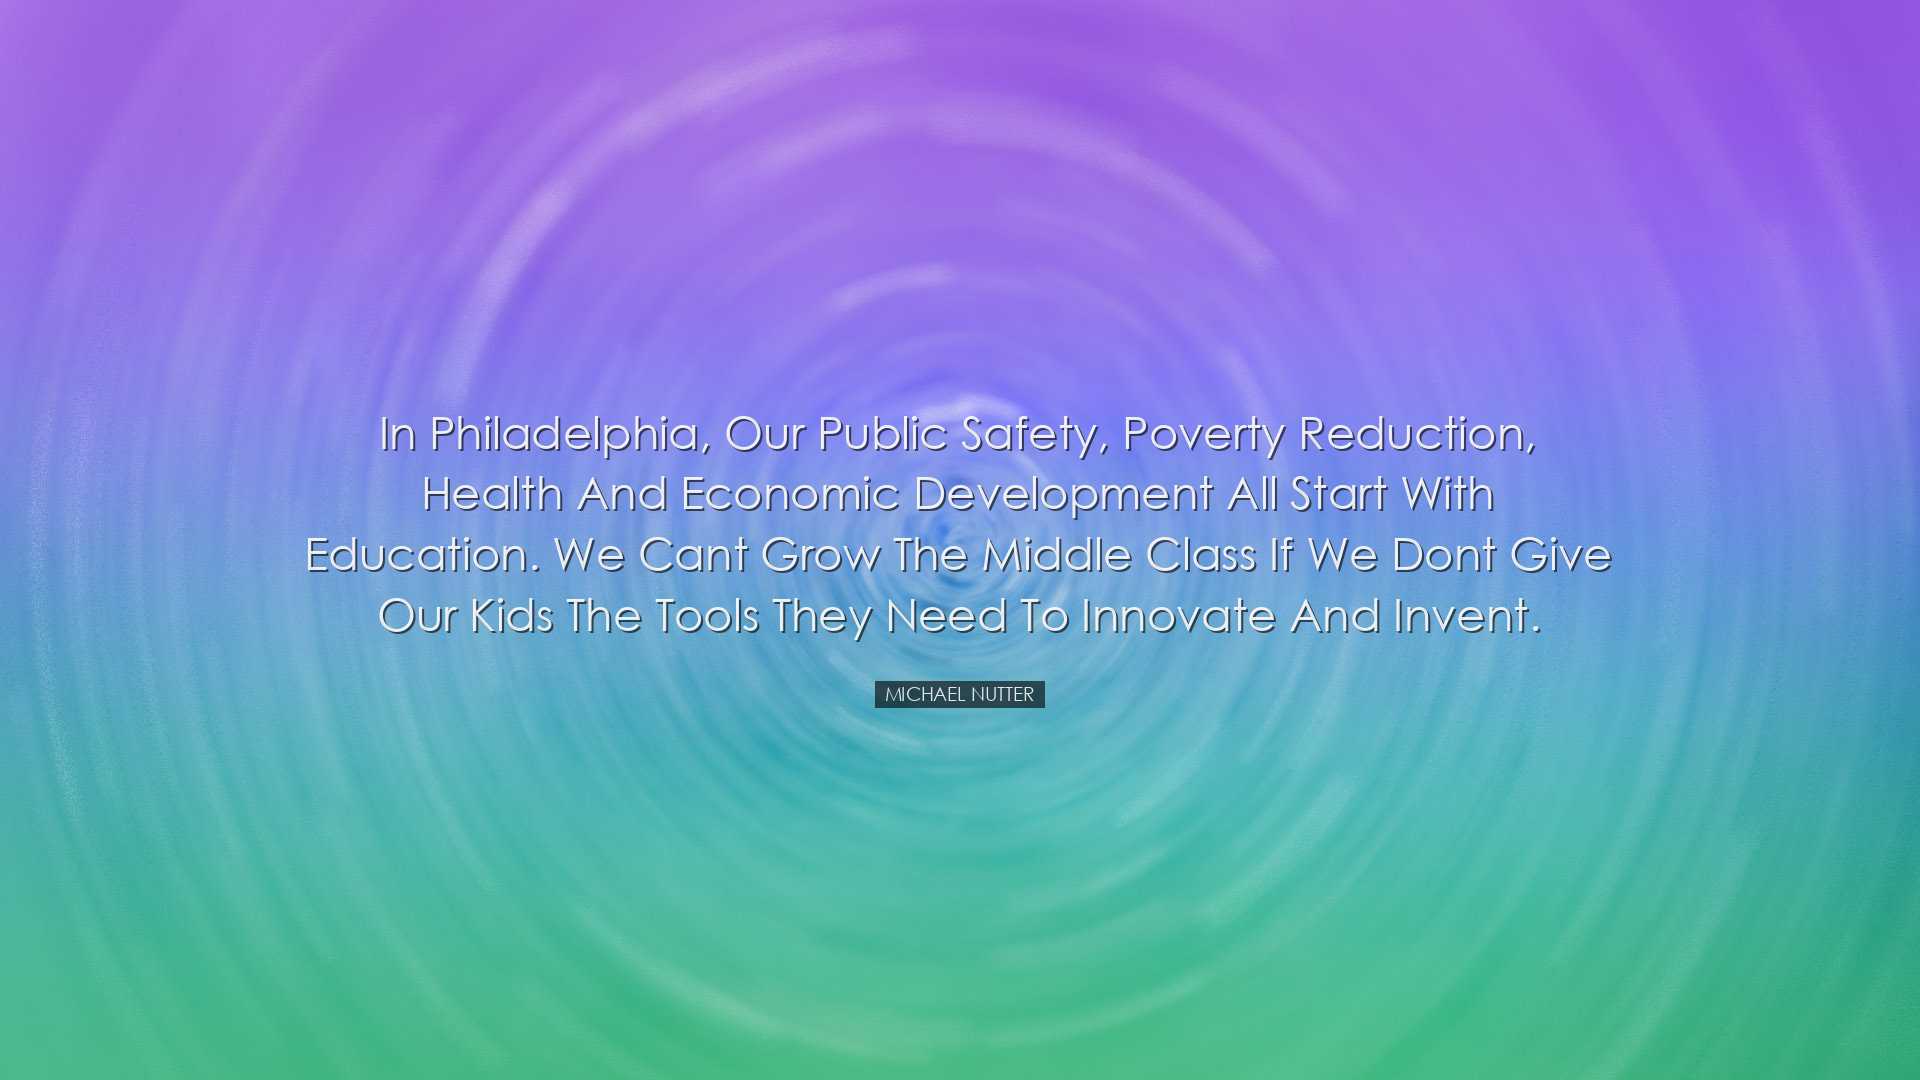 In Philadelphia, our public safety, poverty reduction, health and